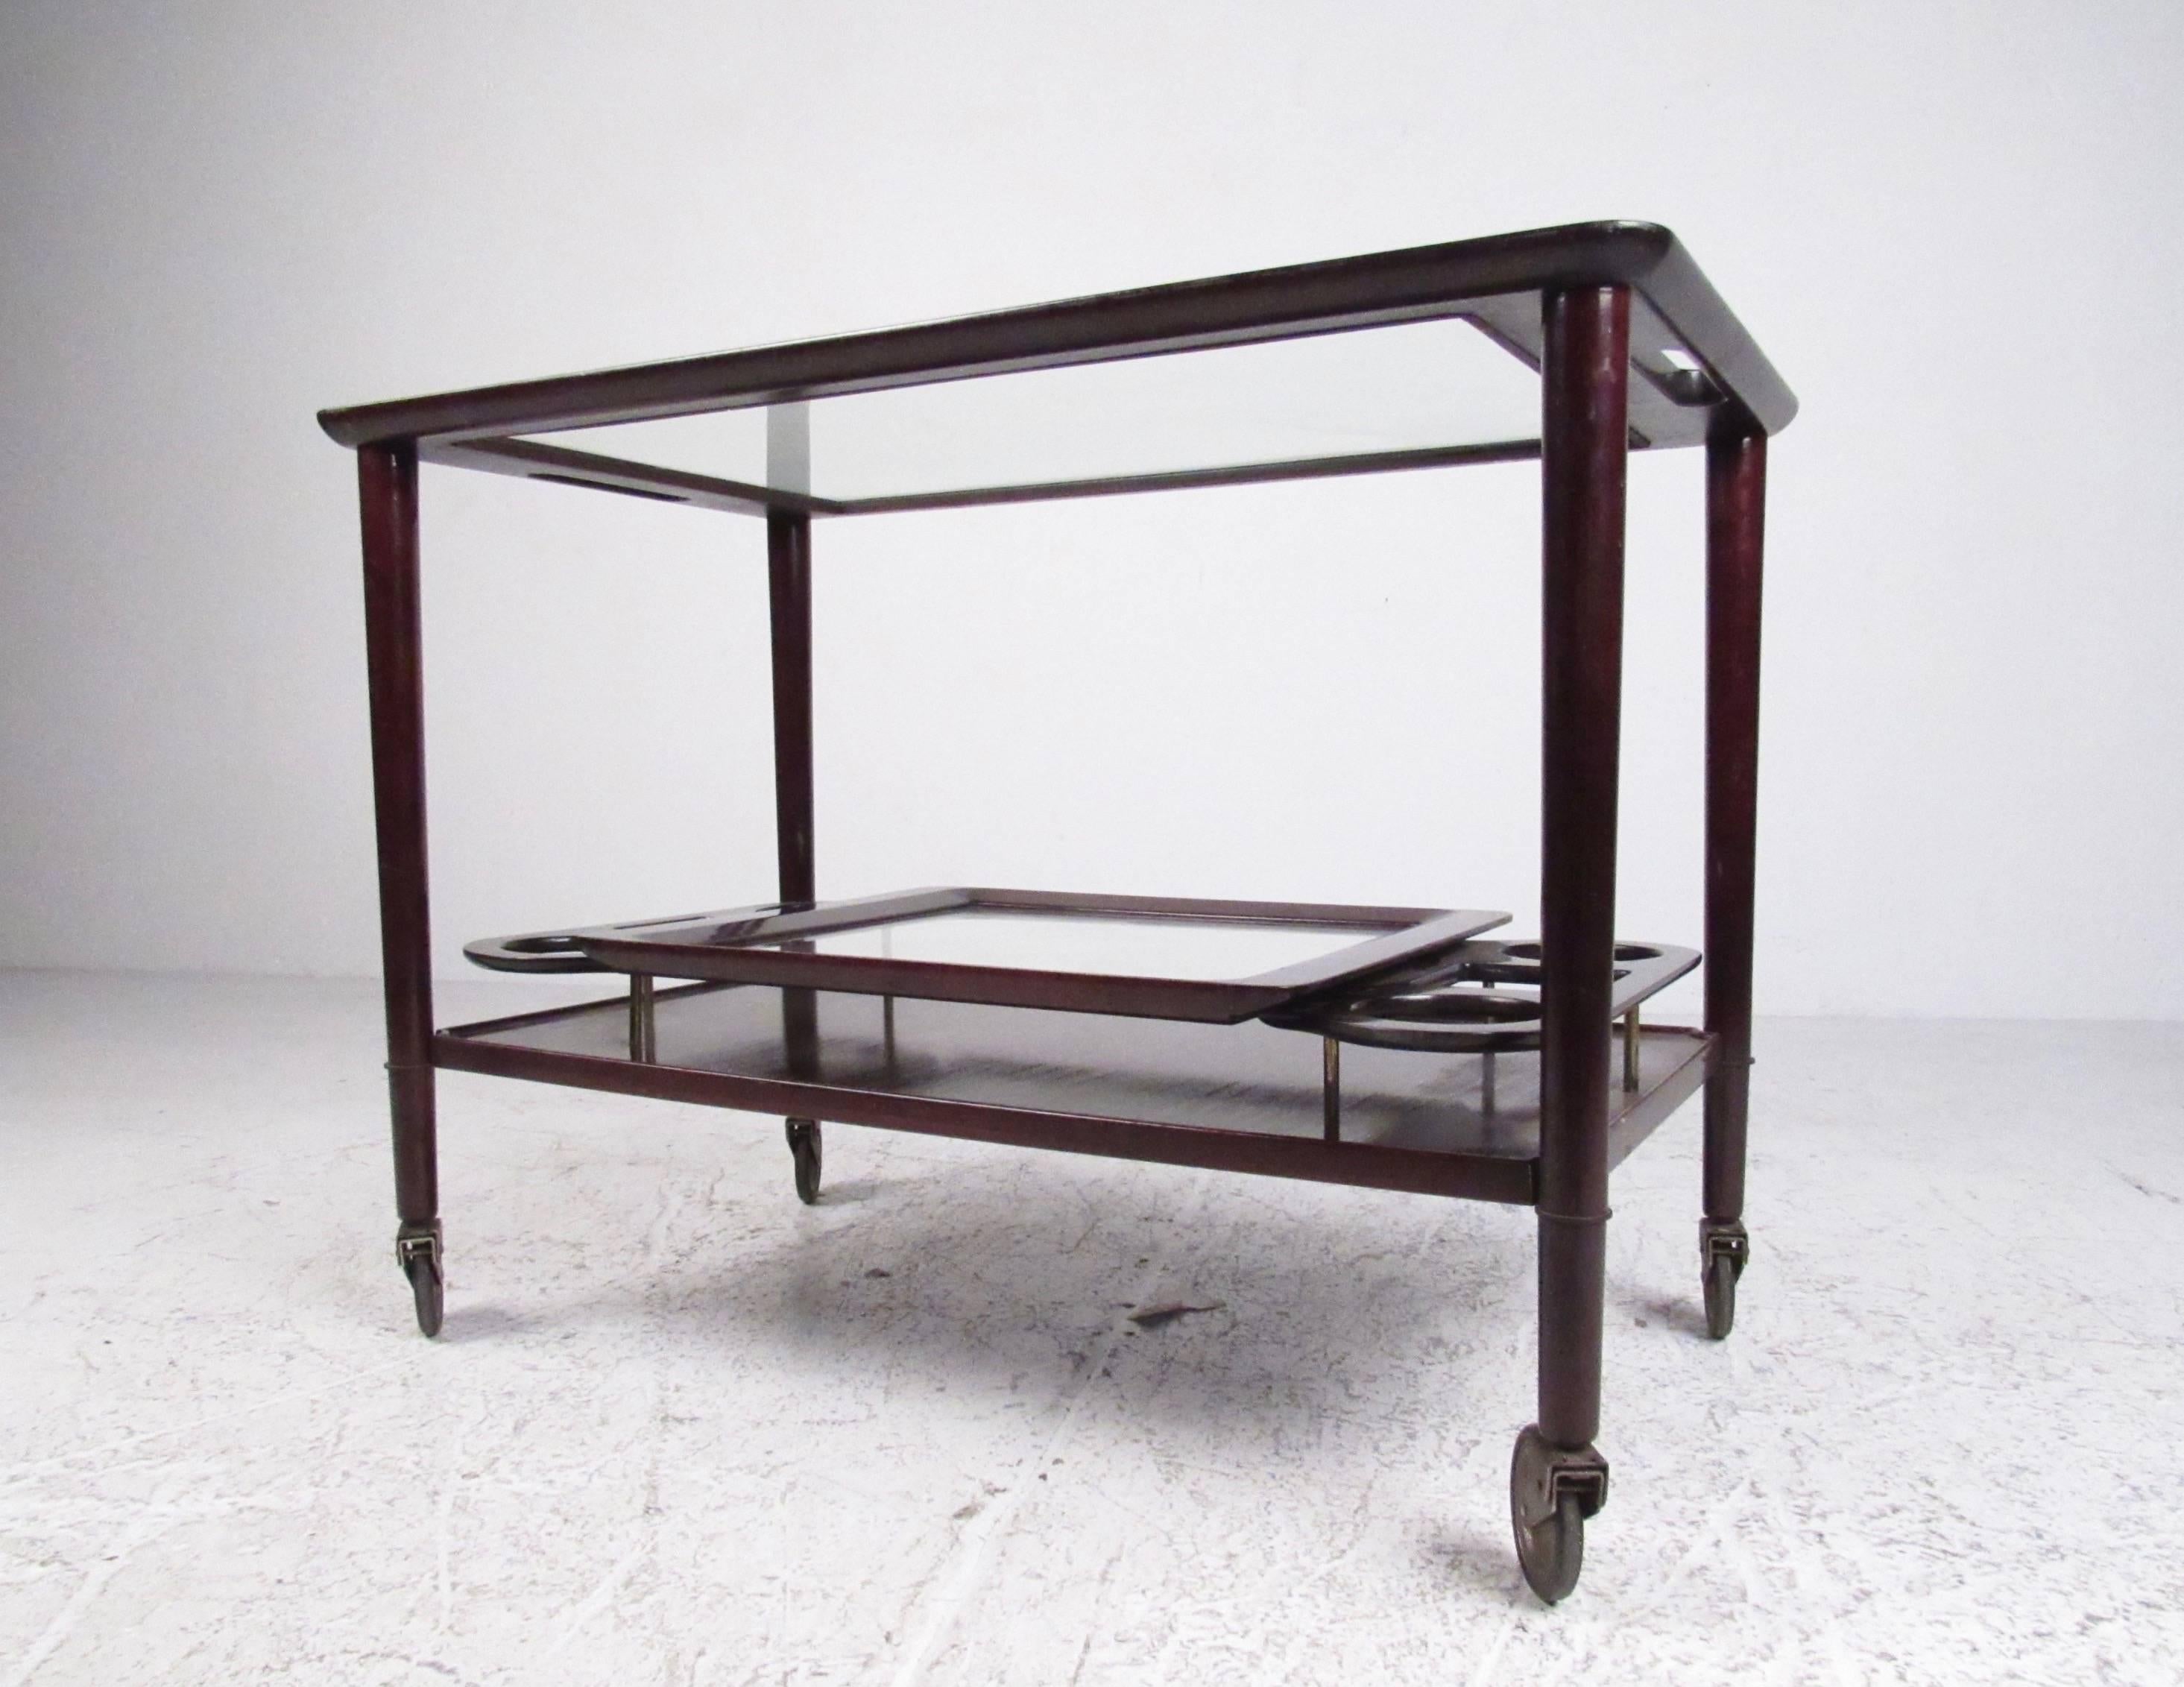 This unique Mid-Century Modern service cart features Italian mahogany construction, tapered/lacquered frame, and sturdy vintage casters. Glass top with matching removable tray offers a spacious and versatile service area perfect for use as a bar